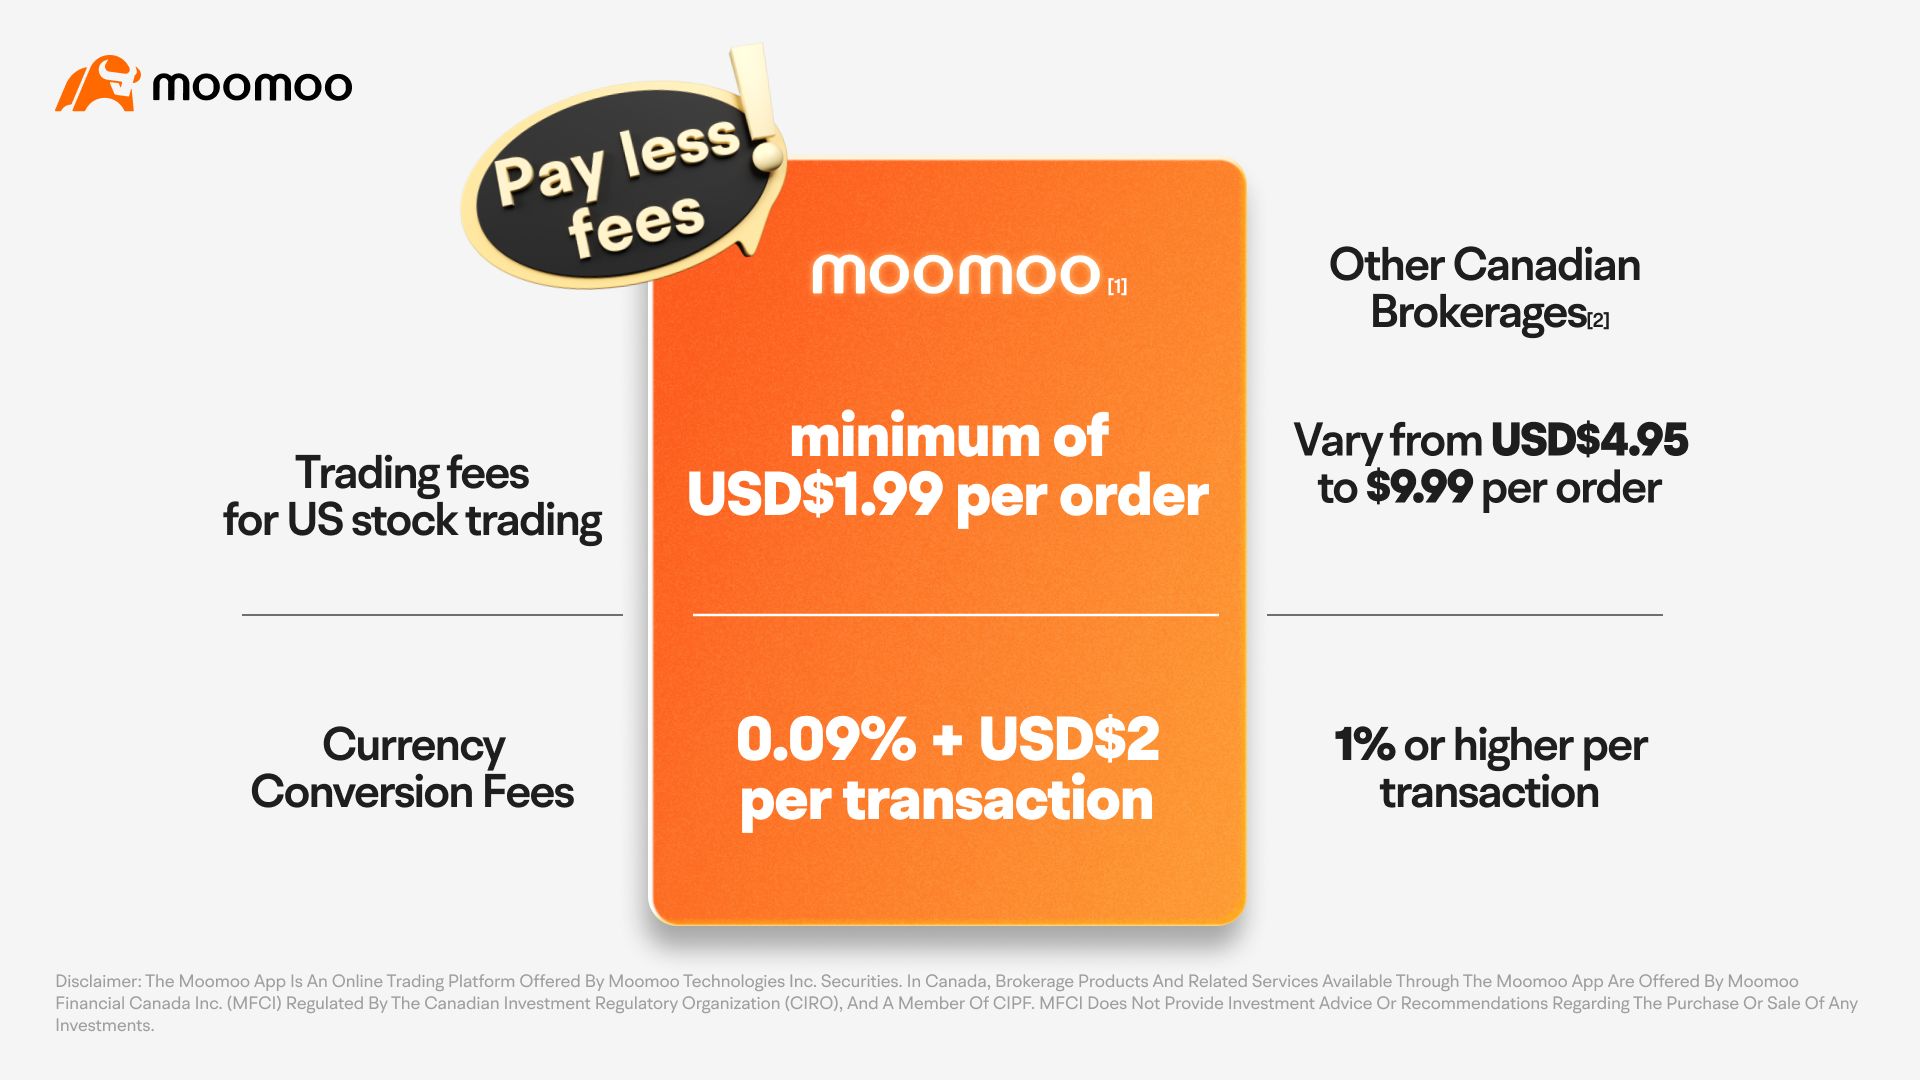 A table showing how moomoo's trading fees and currency conversion fees compare with other Canadian brokerages.